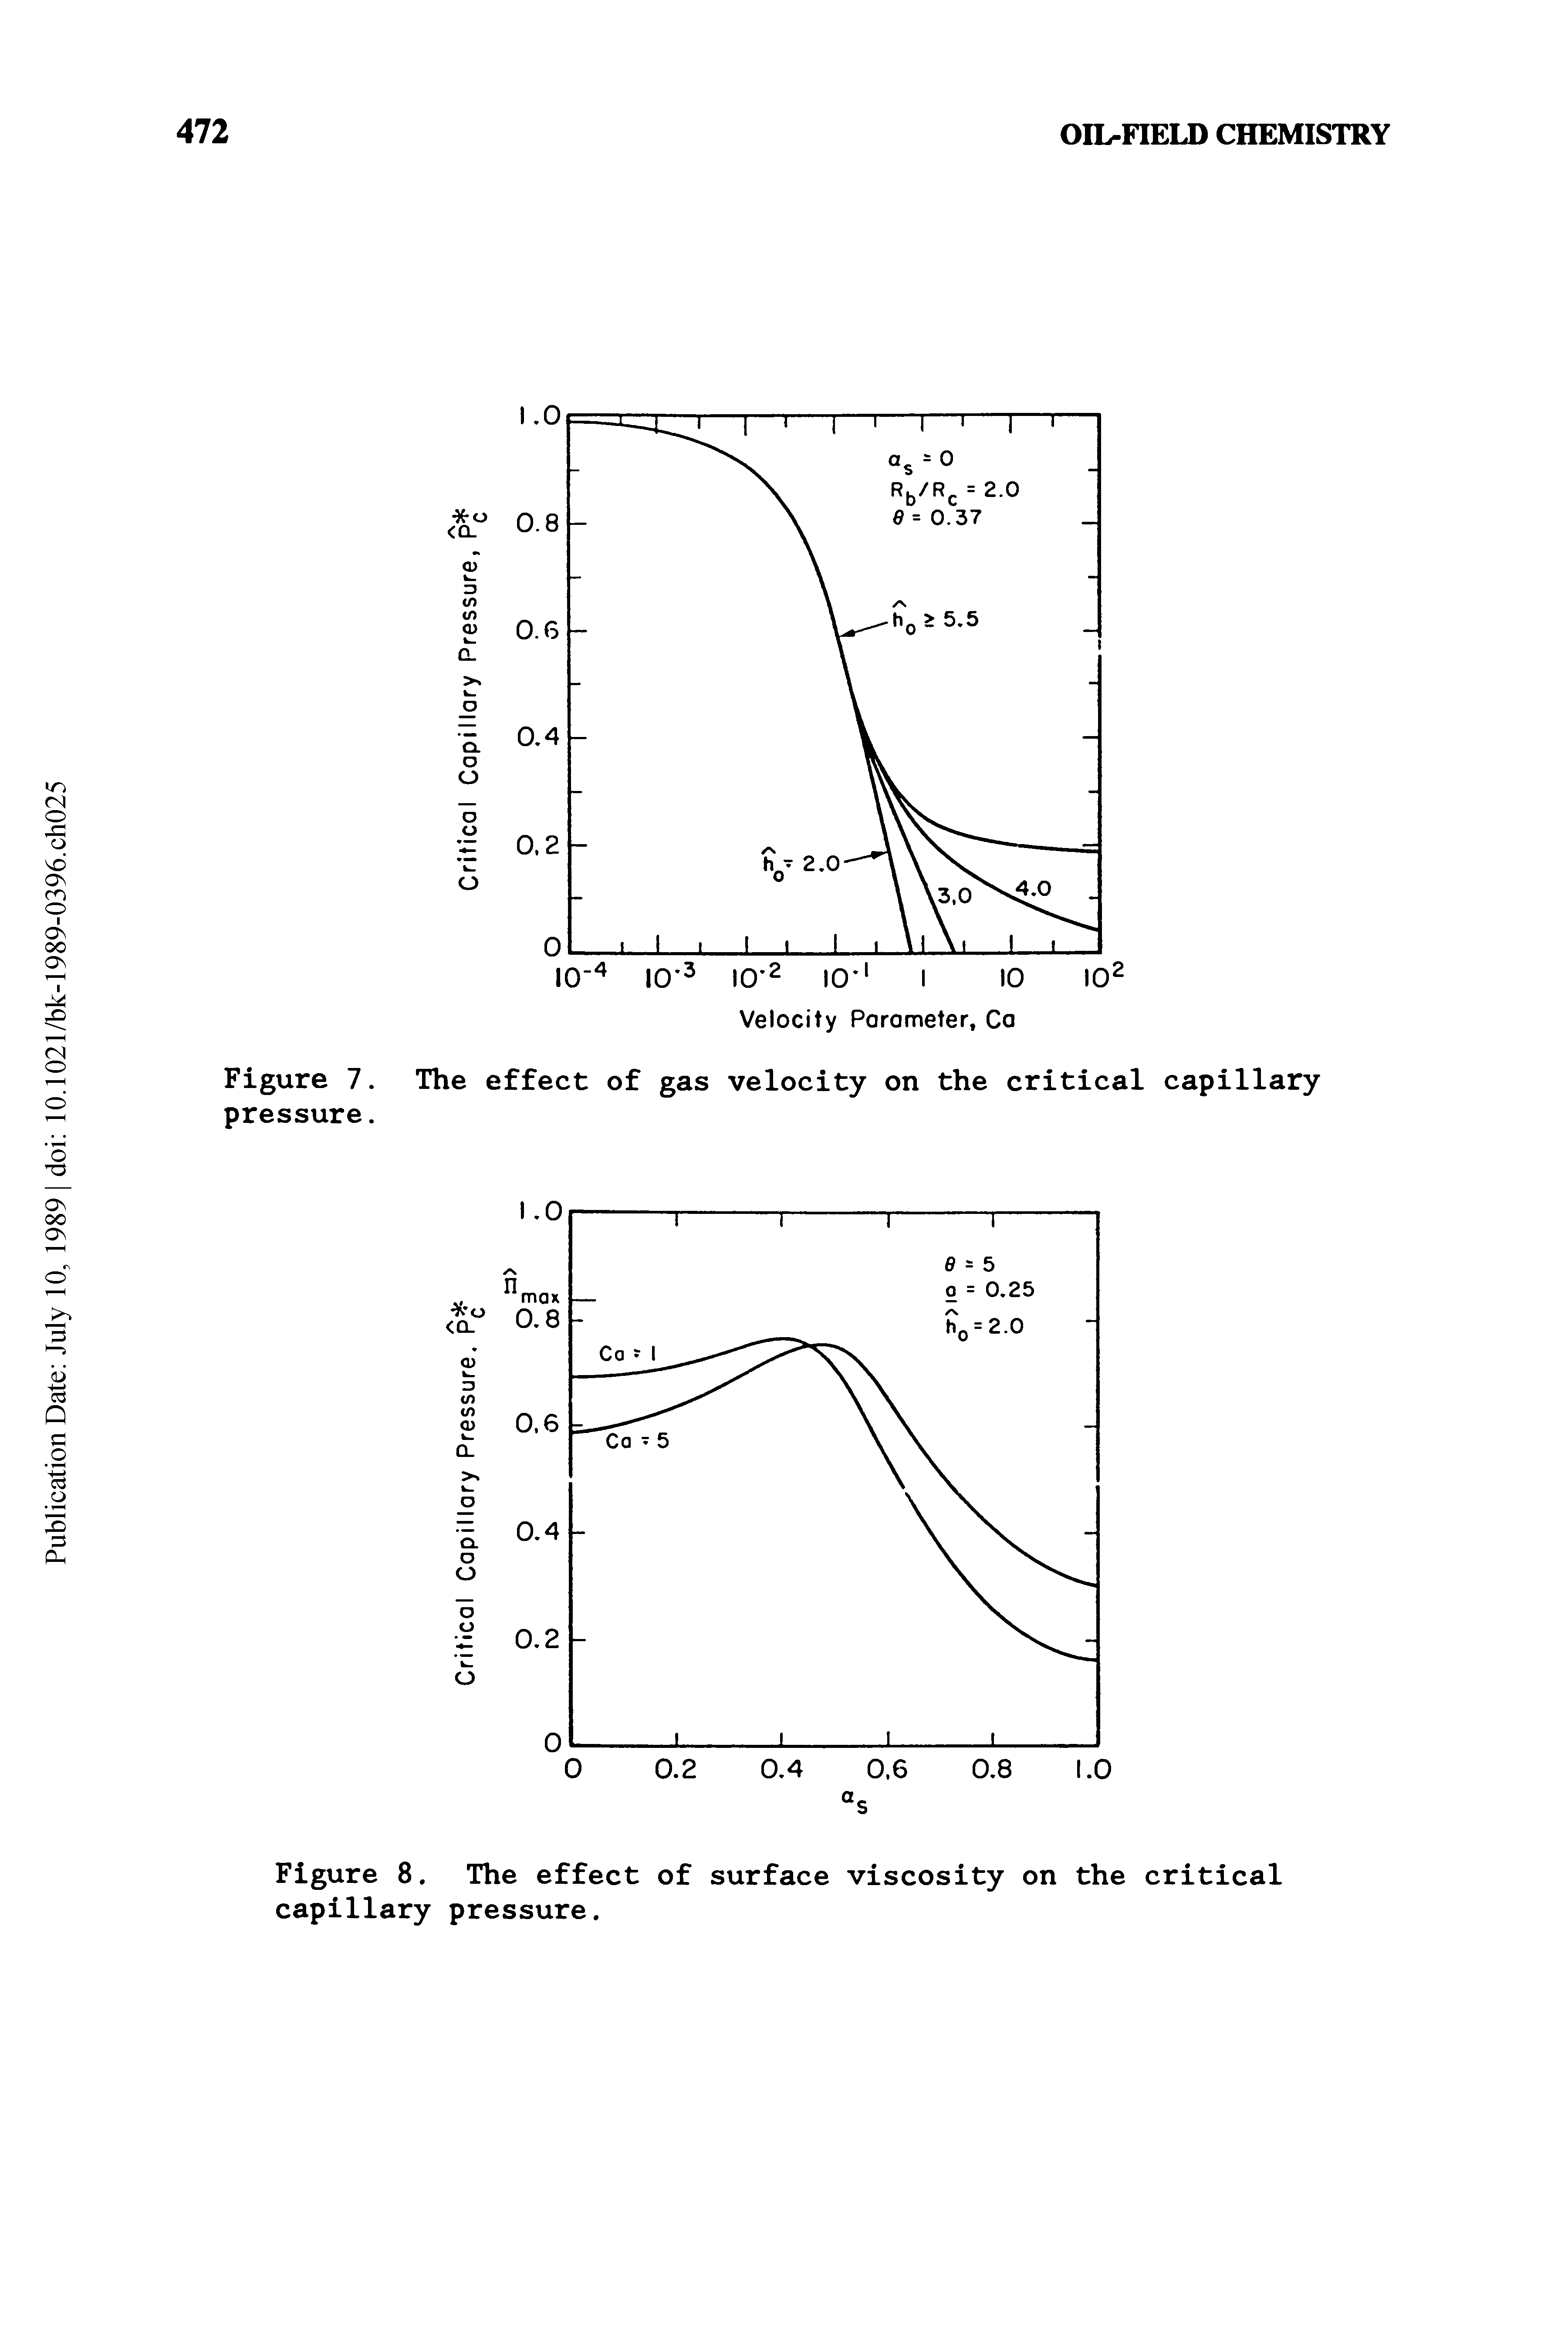 Figure 8. The effect of surface viscosity on the critical capillary pressure.